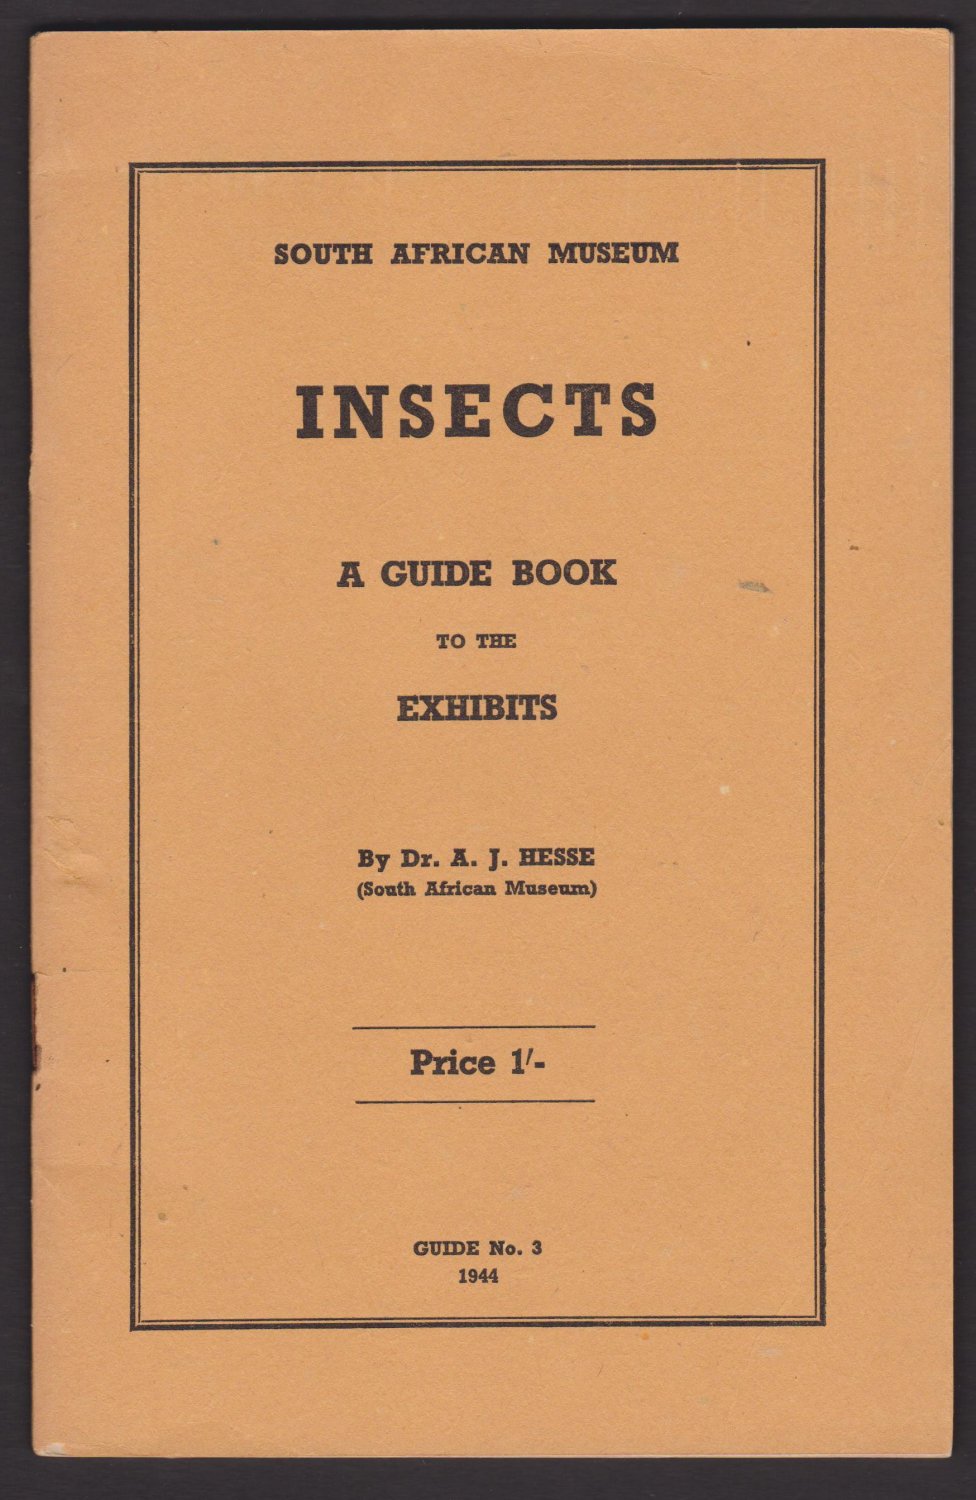 HESSE, A. J. (South African Museum):  A Guide Book to the Exhibits of Insects. 